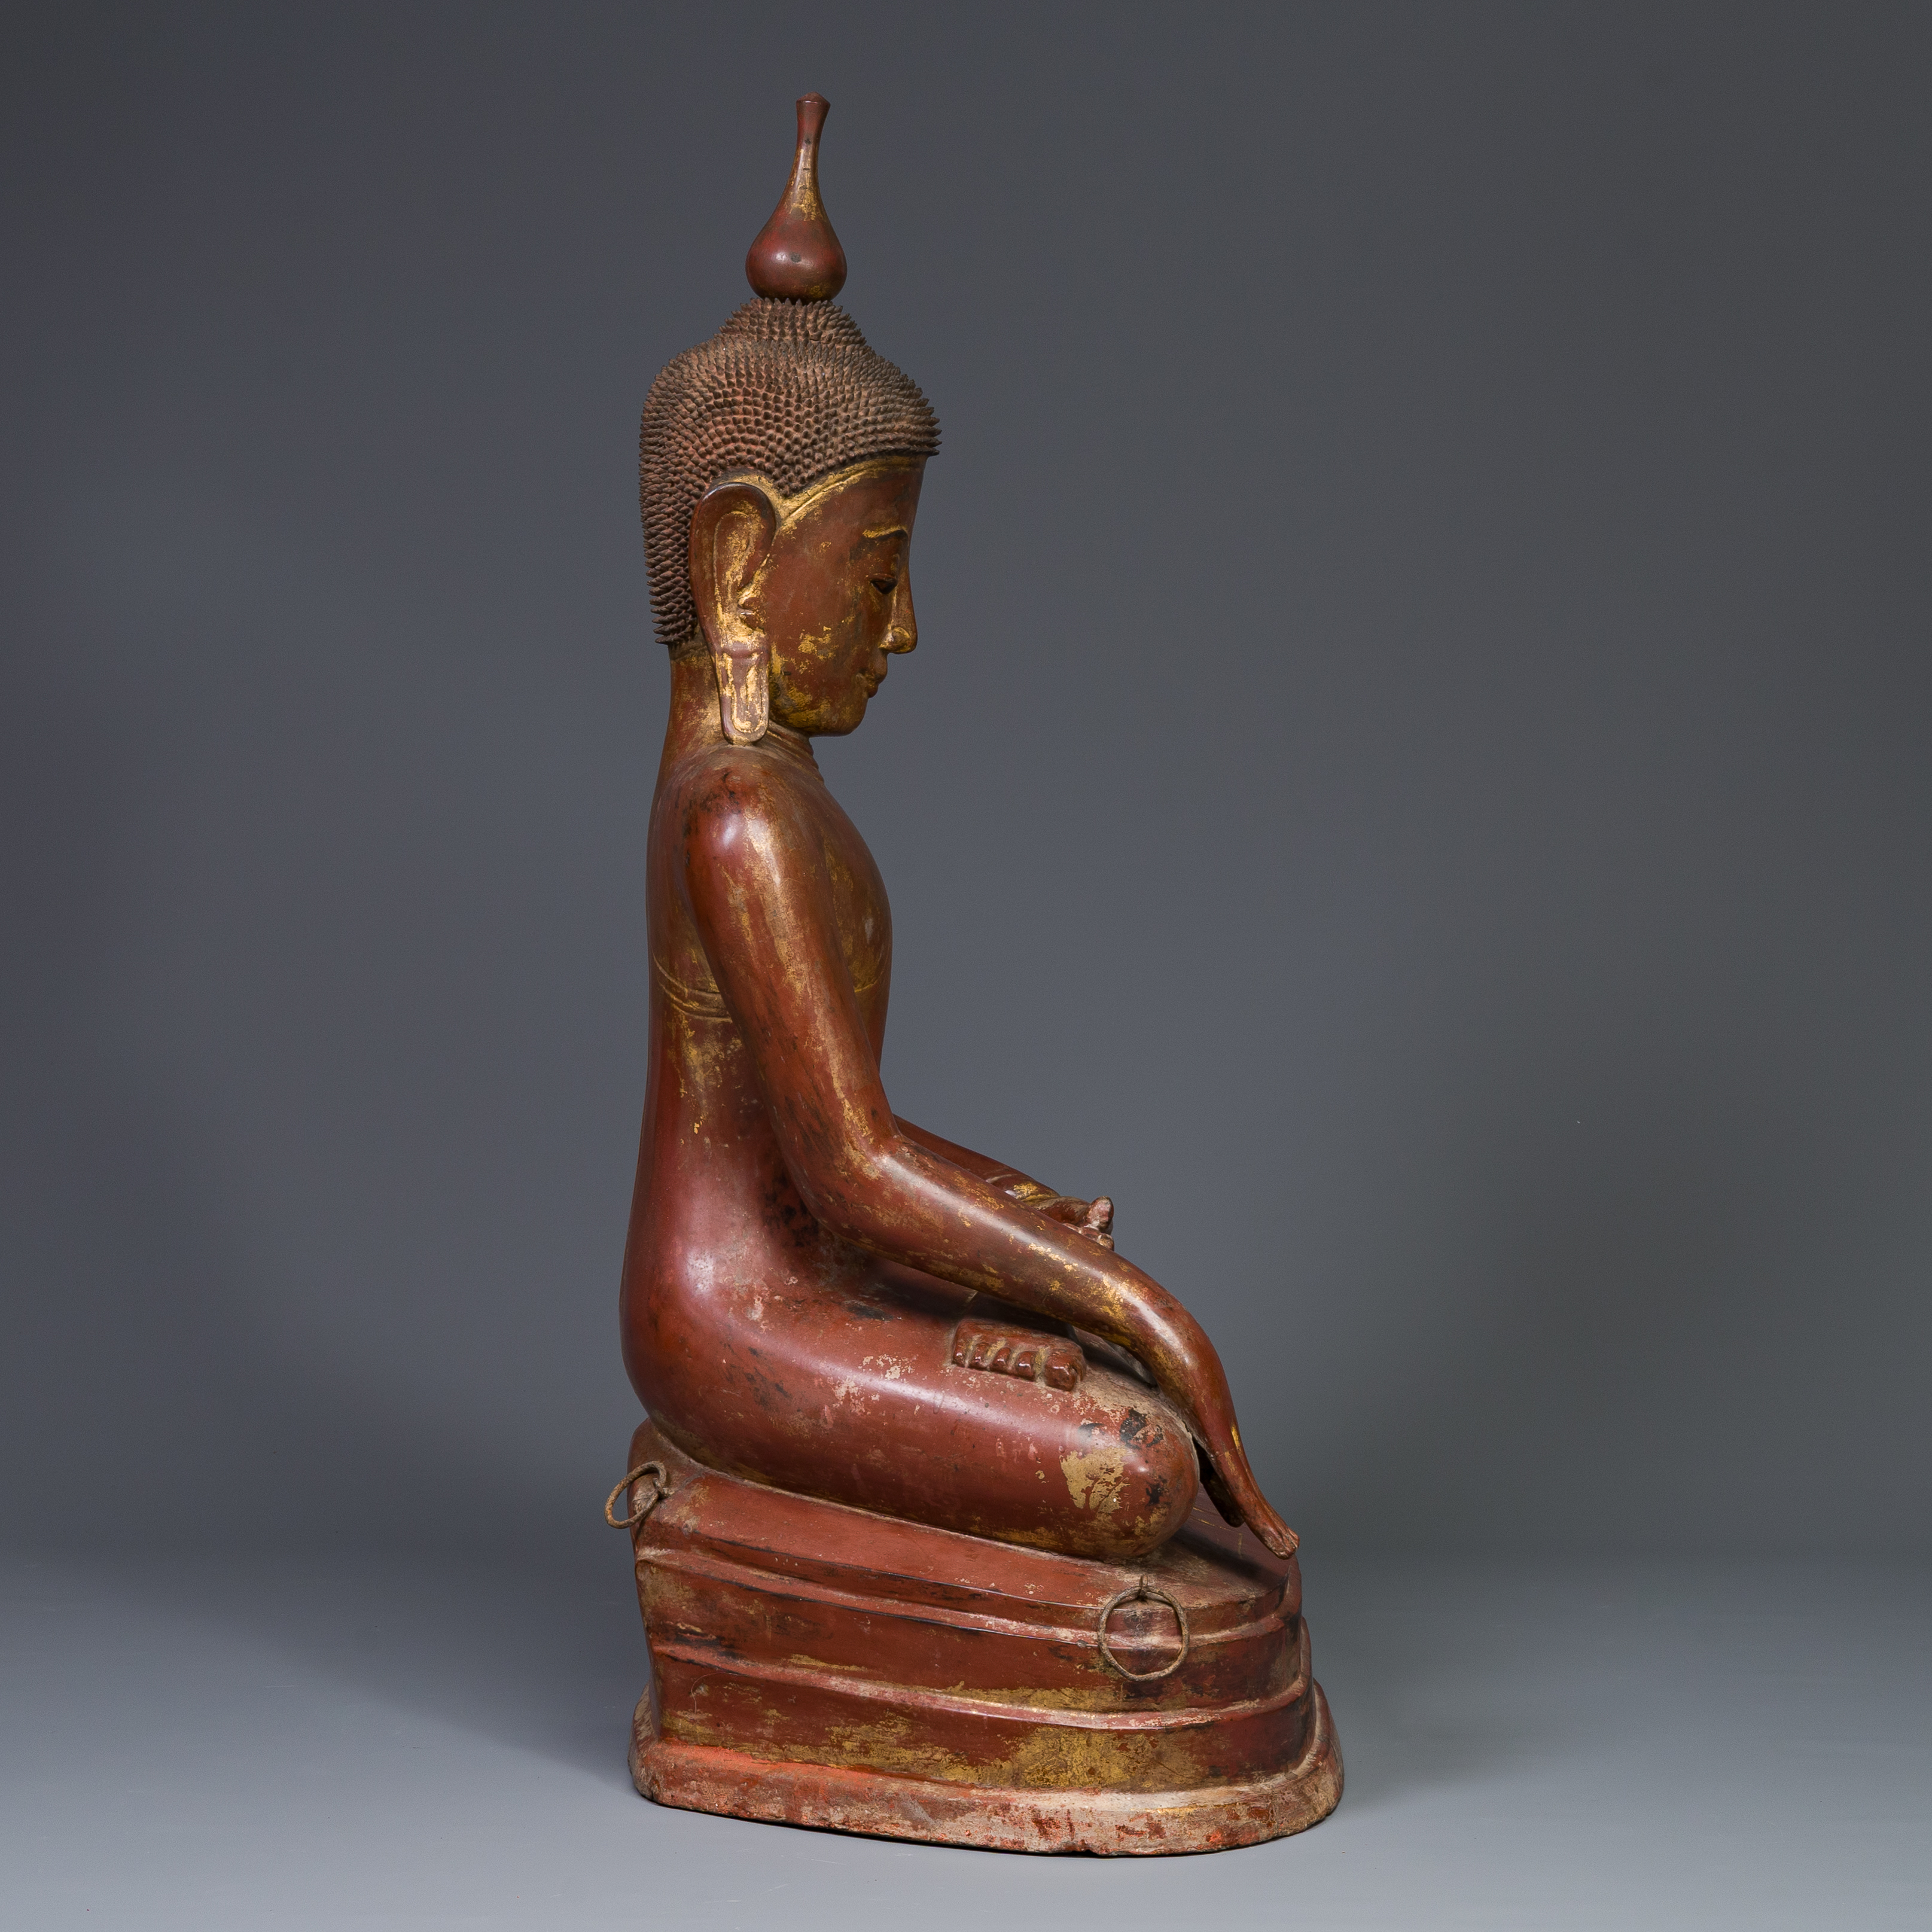 A large Burmese gilded lacquer Buddha in bhumisparsha mudra, 19/20th C. - Image 6 of 18